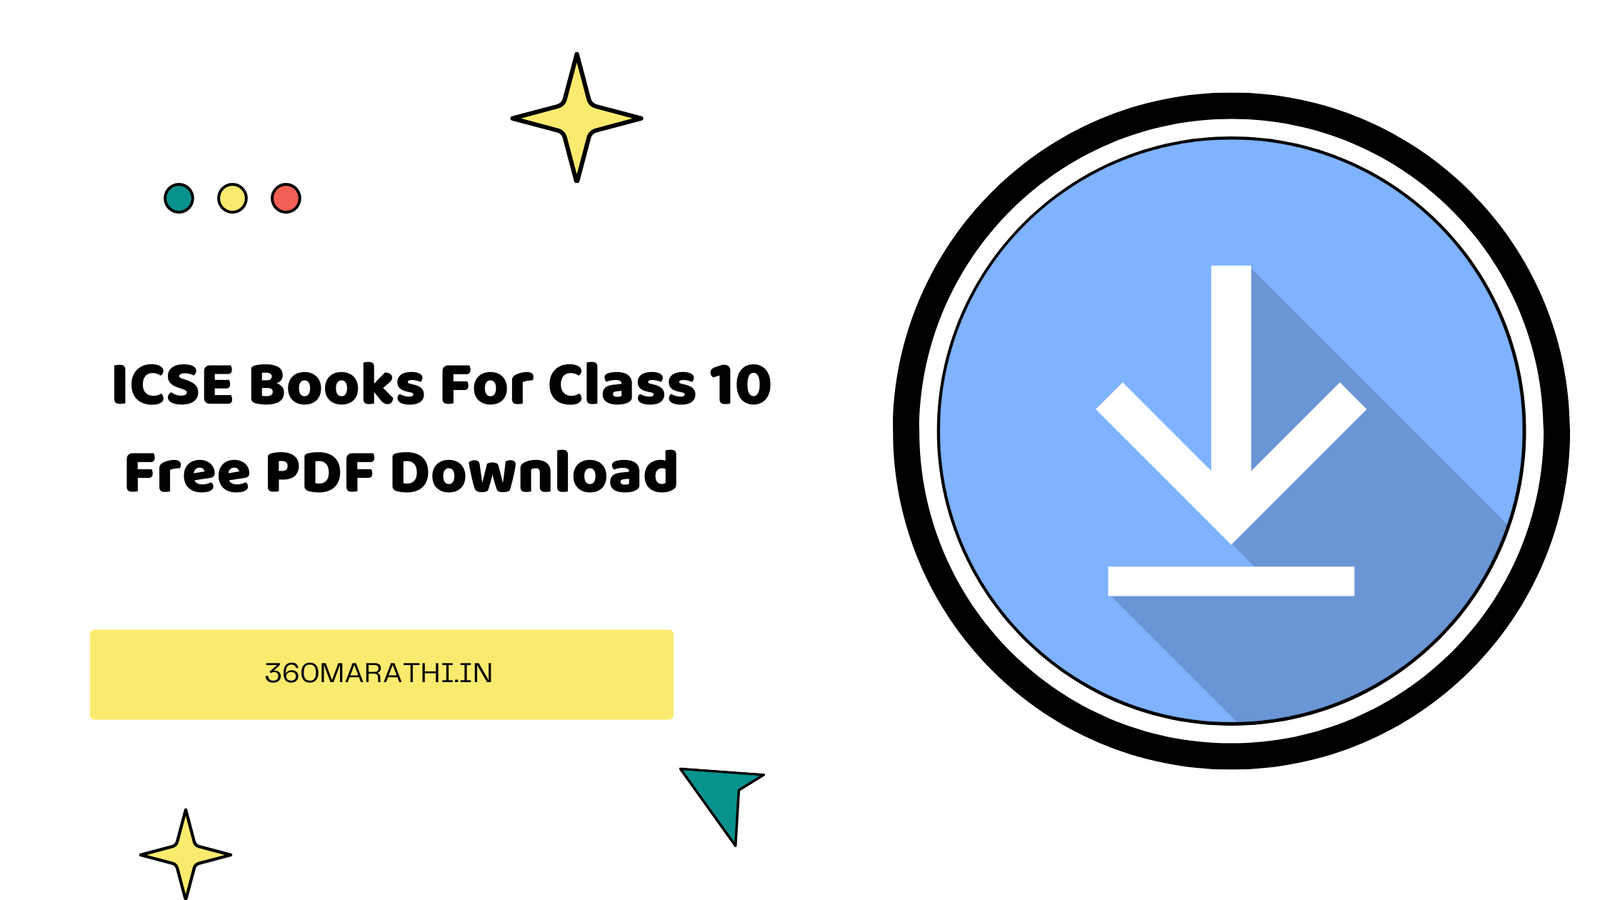 ICSE Books For Class 10 Free PDF Download